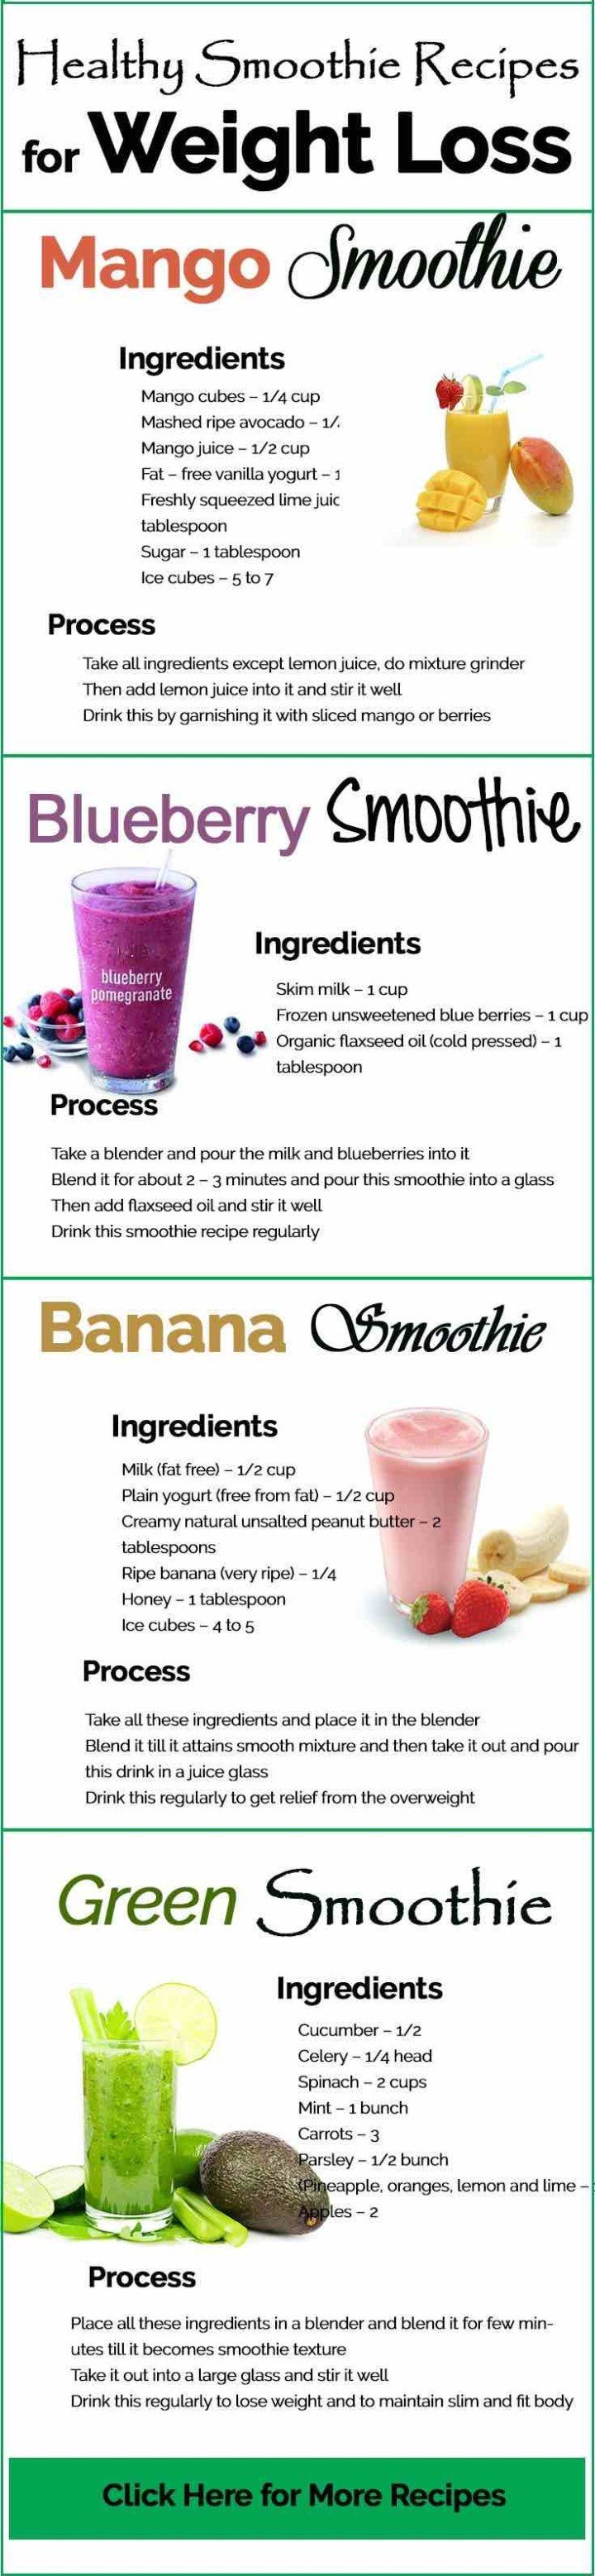 Recipe For Healthy Smoothies For Weight Loss
 Juicing Recipes for Detoxing and Weight Loss MODwedding